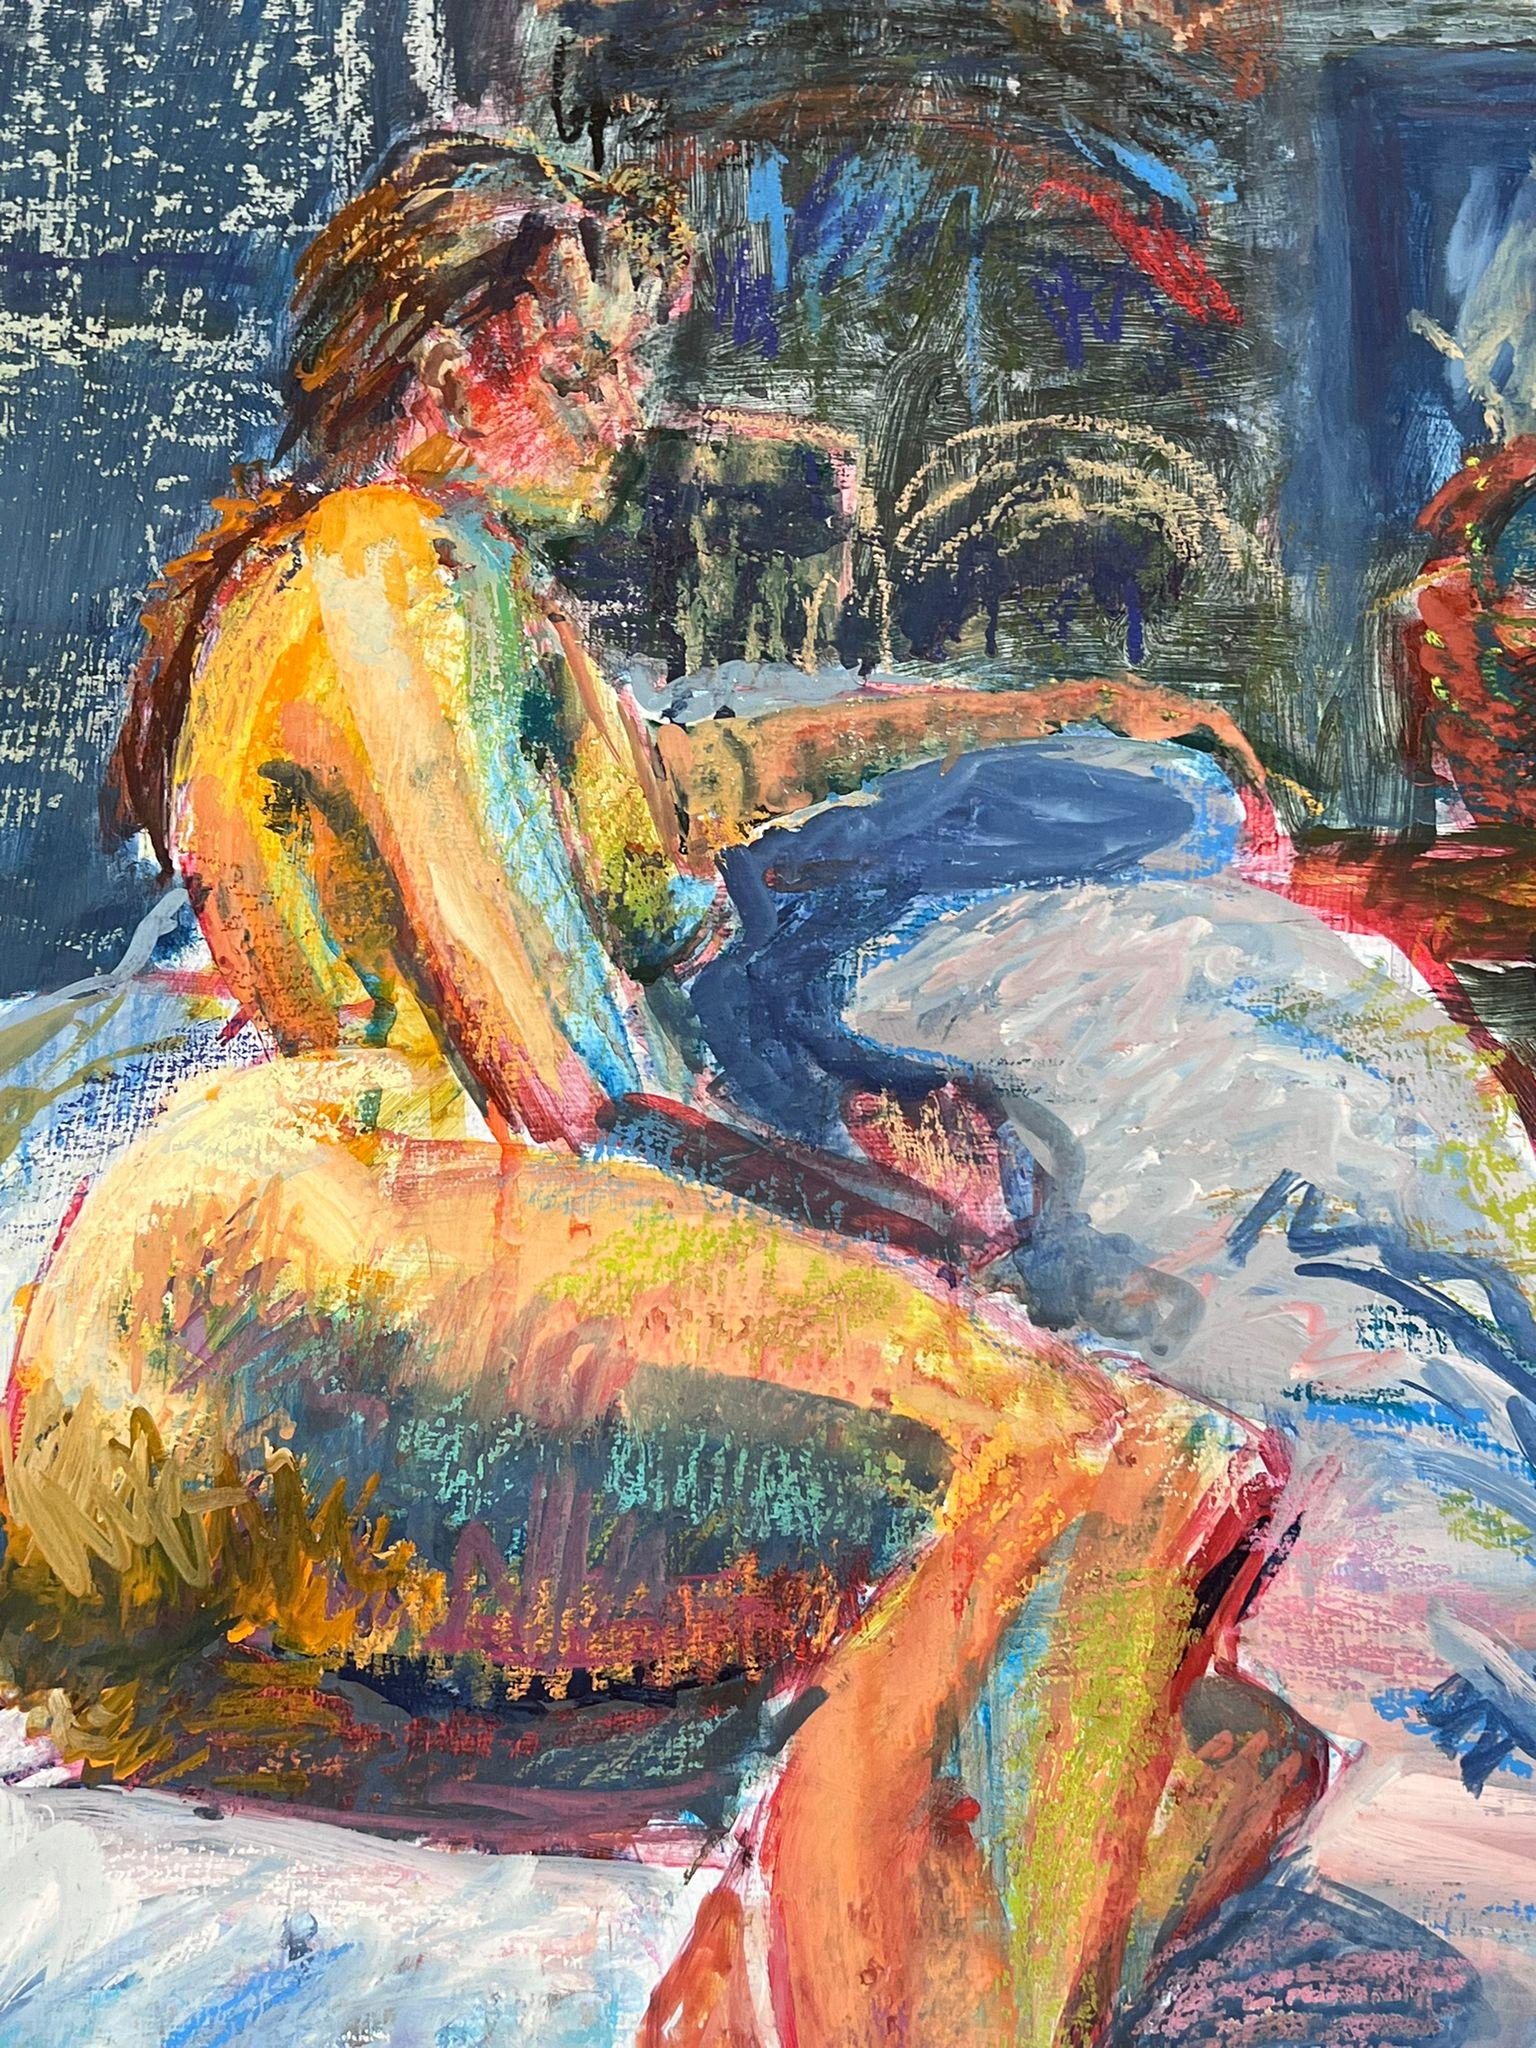 Nude Lady
by Helen Greenfield (British 20th century) 
oil and crayon painting on board, unframed
board: 23 x 17.5 inches
condition: overall very good
provenance: all the paintings we have by this artist have come from their studio sale in